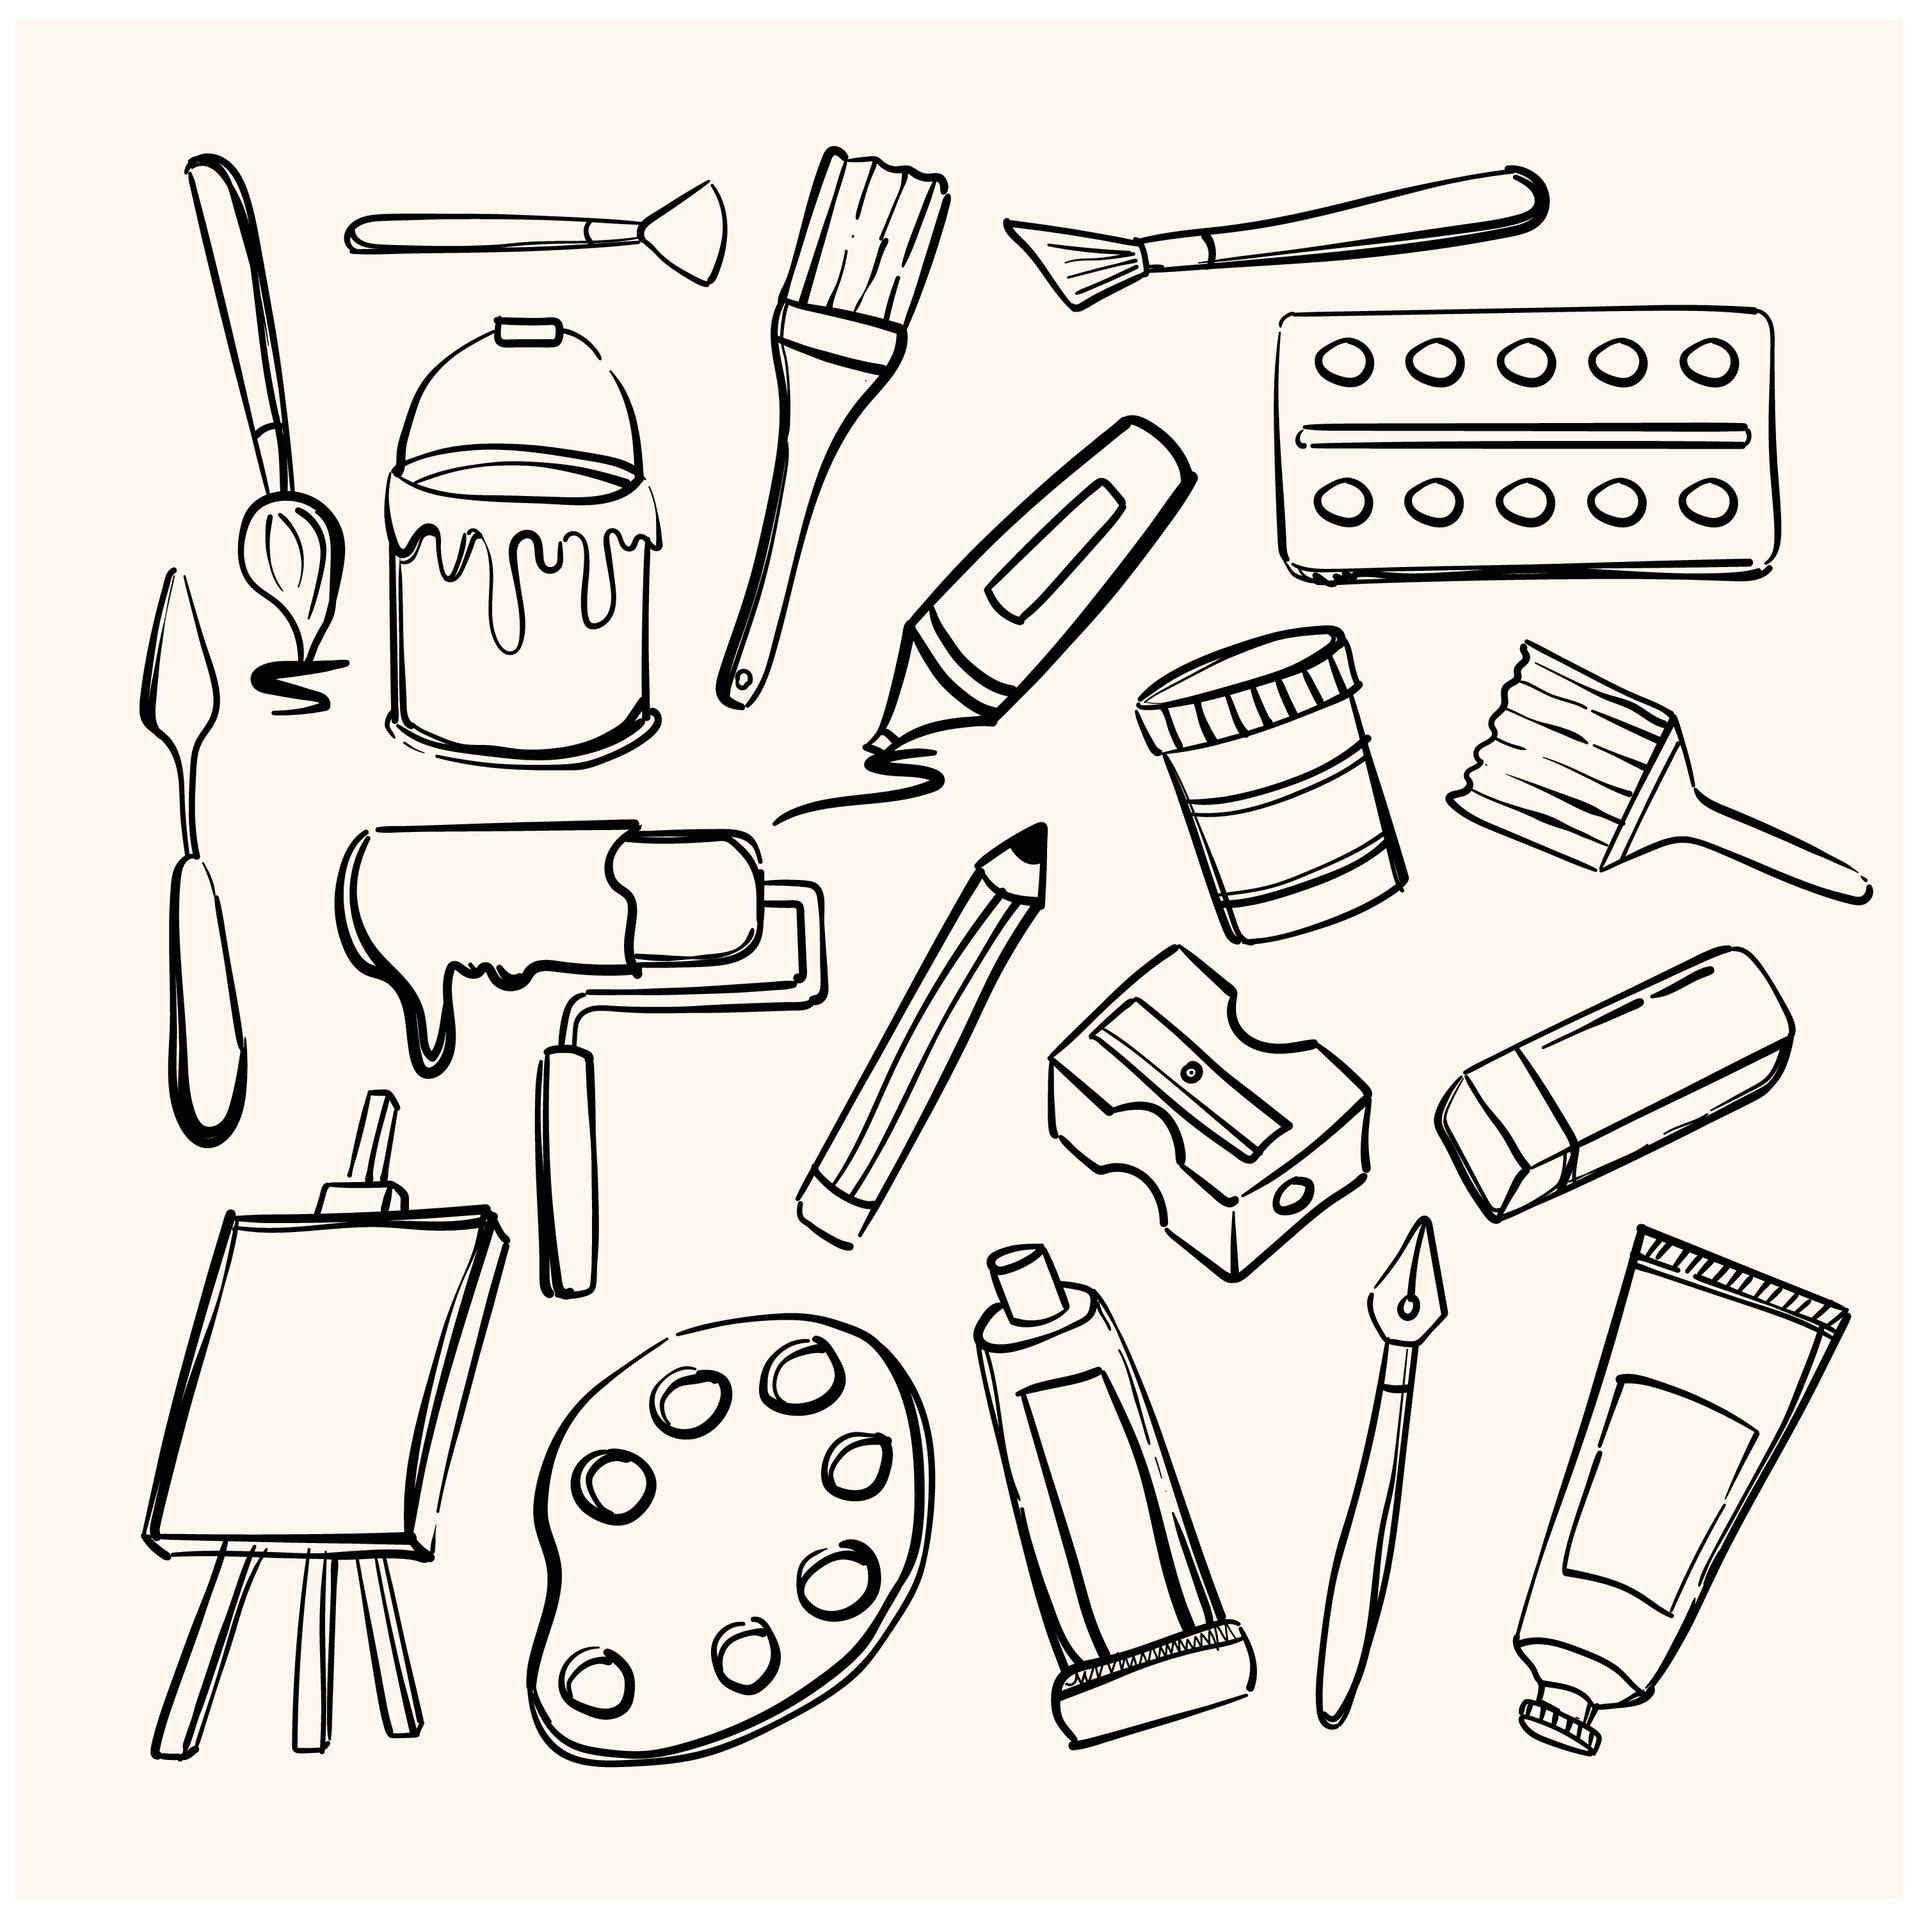 https://static.vecteezy.com/system/resources/previews/028/172/964/original/hand-drawn-set-of-artist-tools-doodle-art-supplies-in-sketch-style-easel-brushes-paint-pencils-illustration-isolated-on-white-background-free-vector.jpg